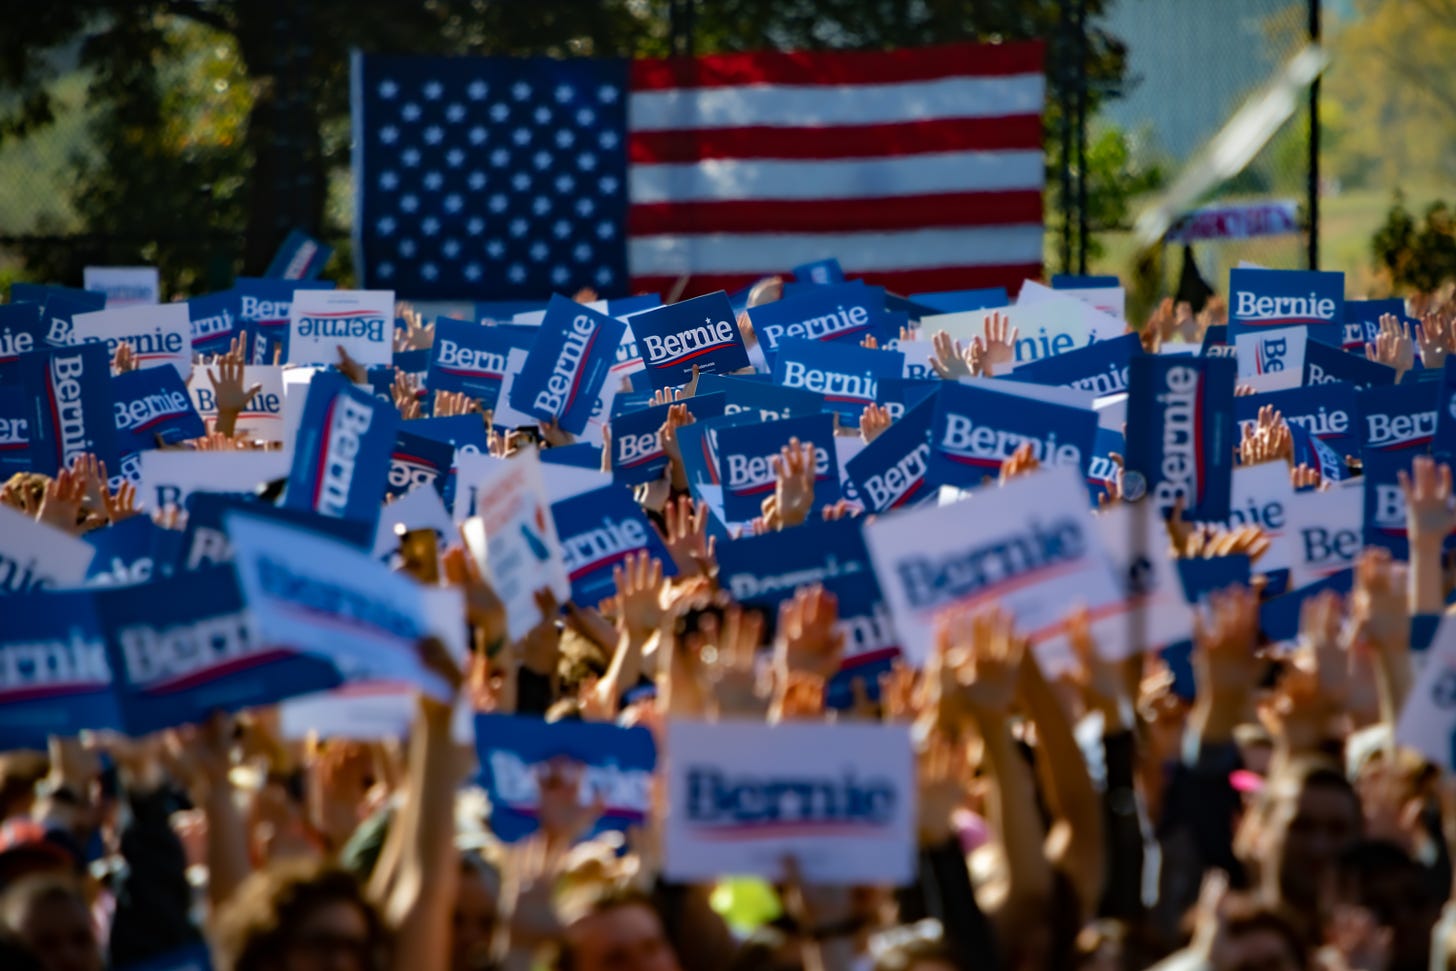 The event dubbed "Bernie's Back Rally" comes as Sanders returns to campaigning after suffering a heart attack earlier this month. An estimated 26,000 people attended. (Photo by Michael Nigro/Pacific Press/LightRocket via Getty Images)